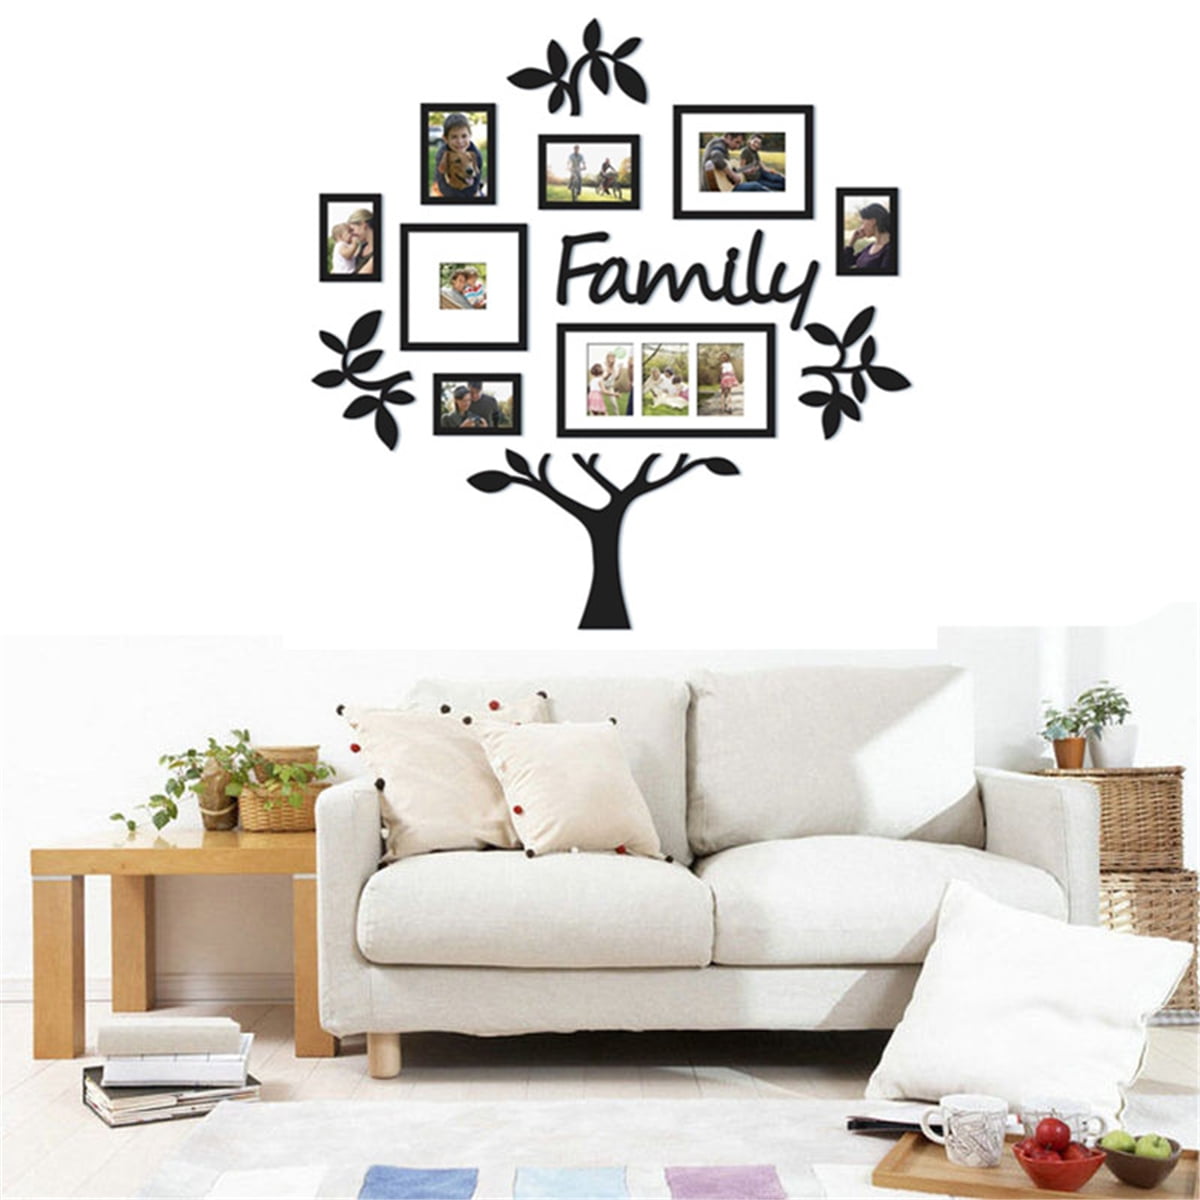 Family Tree Frame Collage Pictures Collage Photo Wall Mount Decor Wedding Black